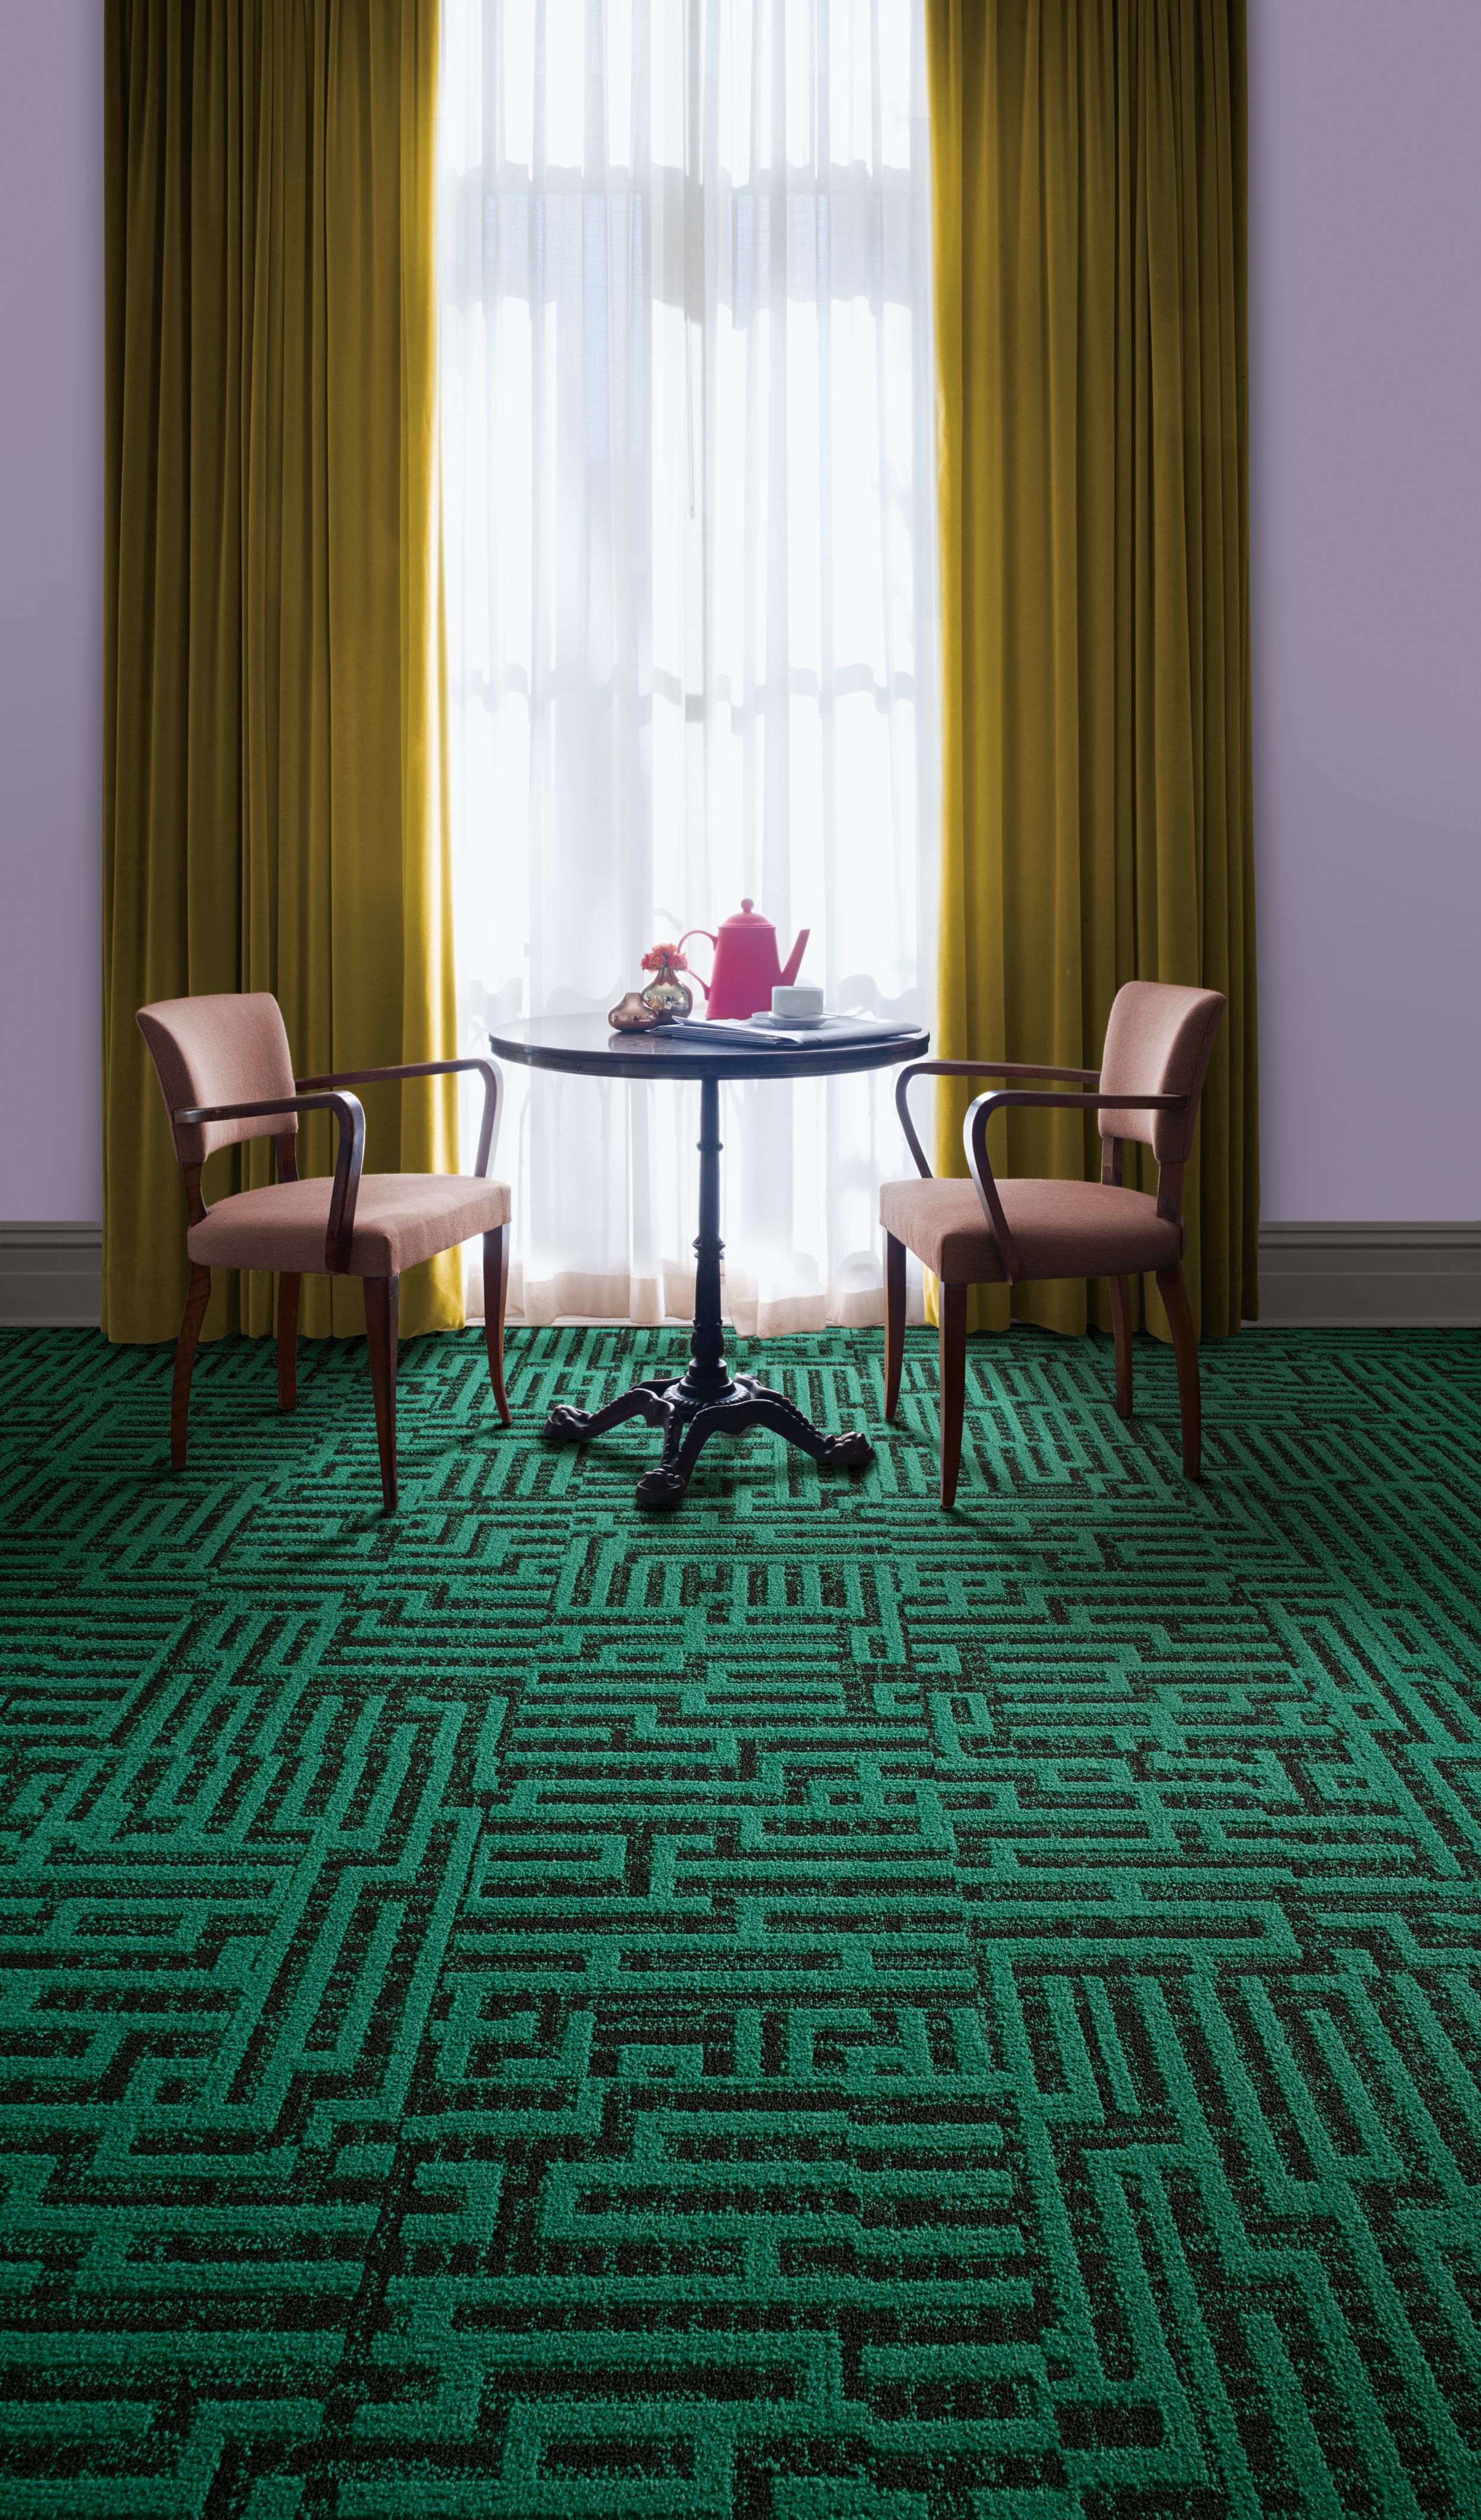 Interface PM29 plank carpet tile in seating area for two by window numéro d’image 5